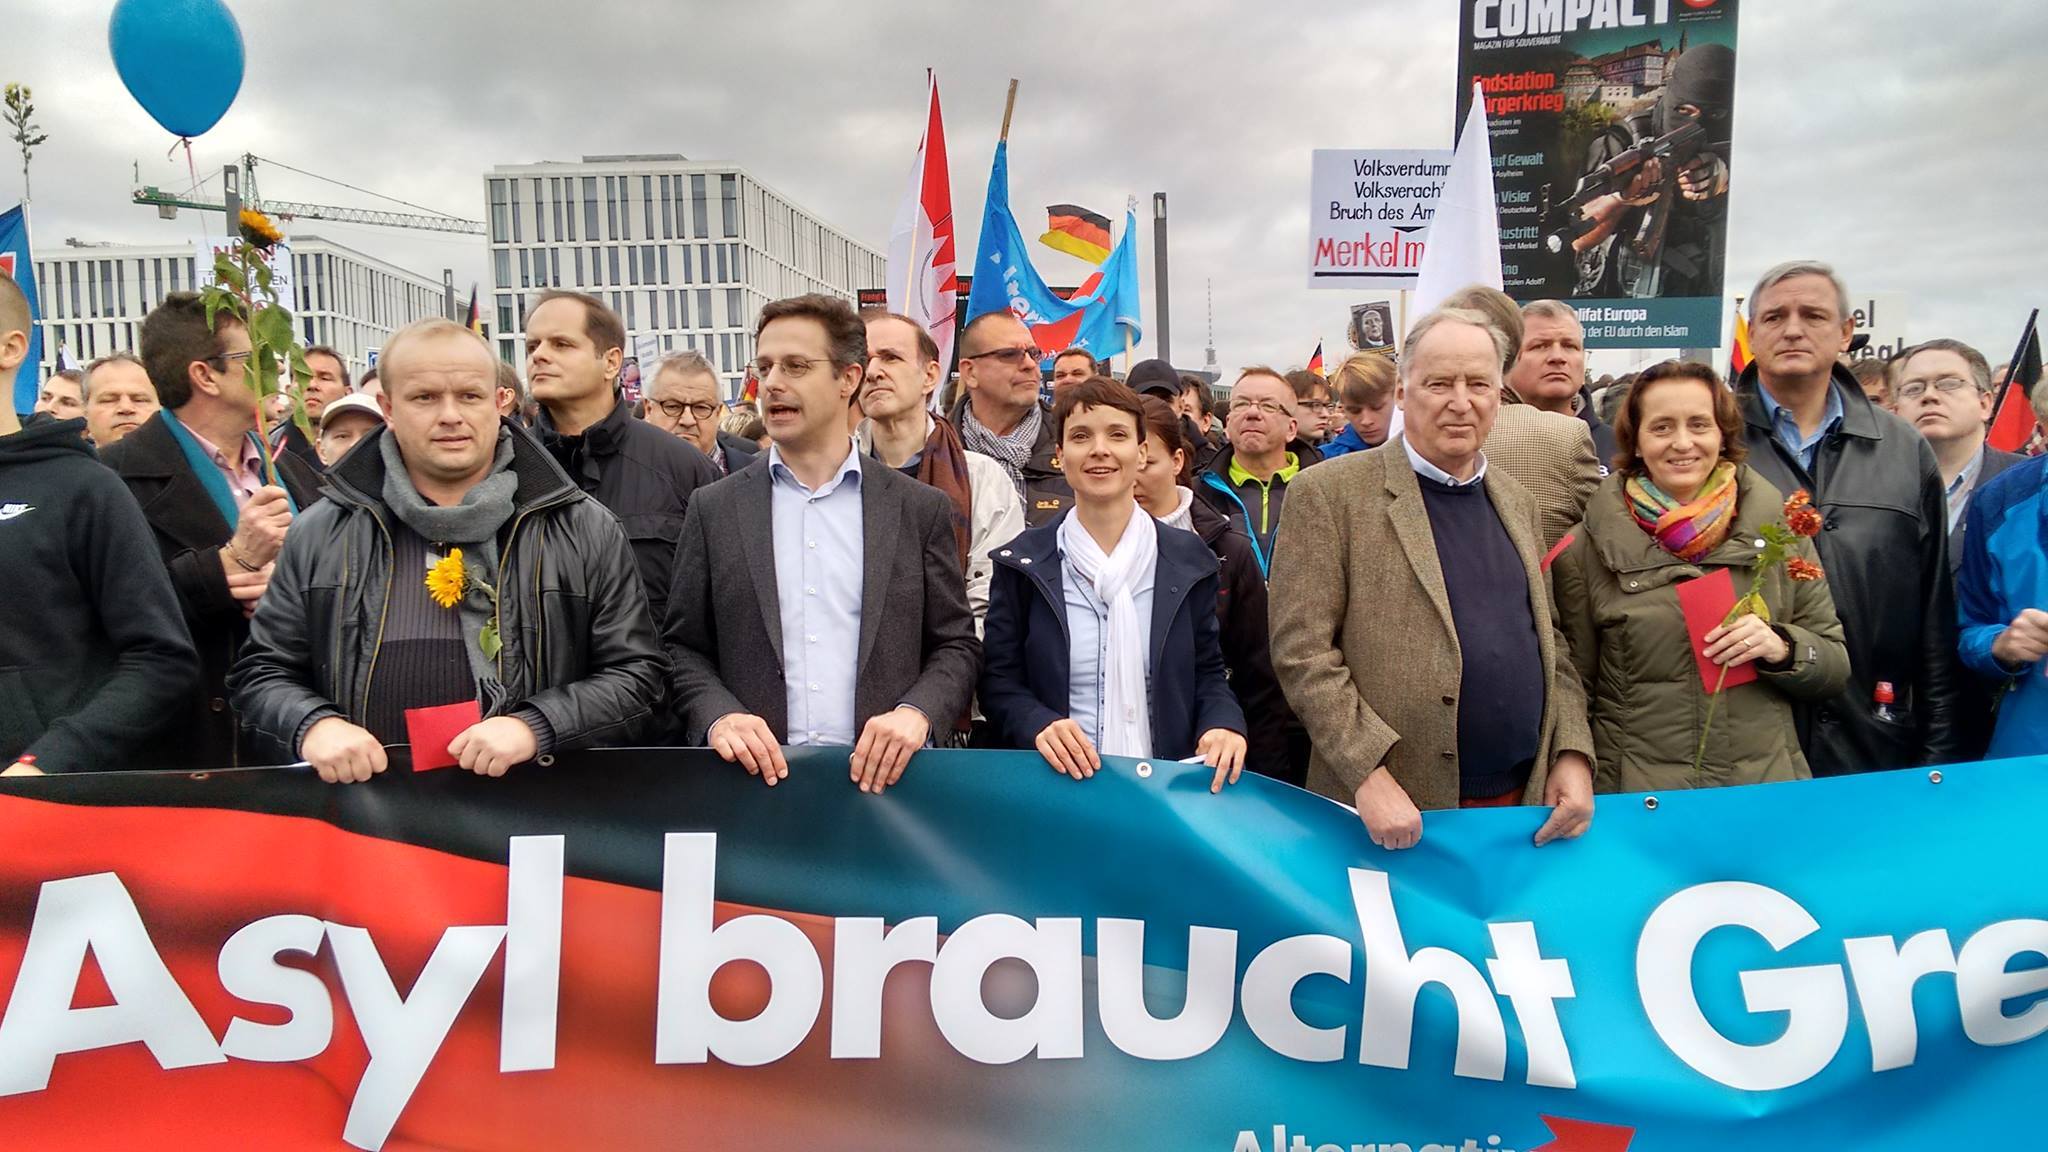 The German Anti-Immigrant AfD Party Is On The Rise